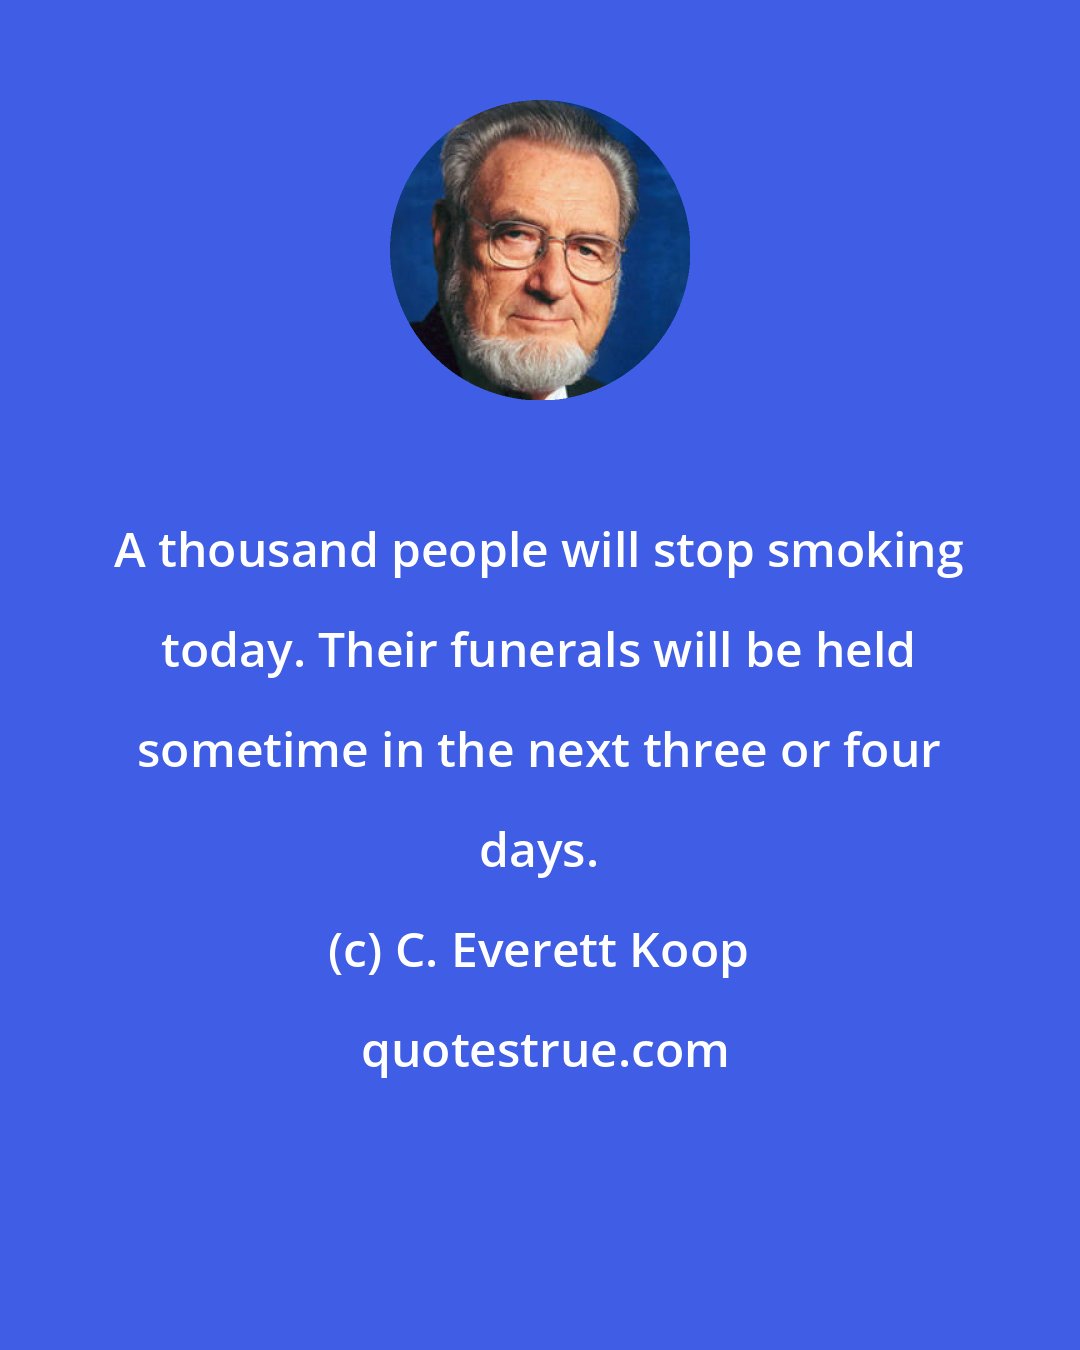 C. Everett Koop: A thousand people will stop smoking today. Their funerals will be held sometime in the next three or four days.